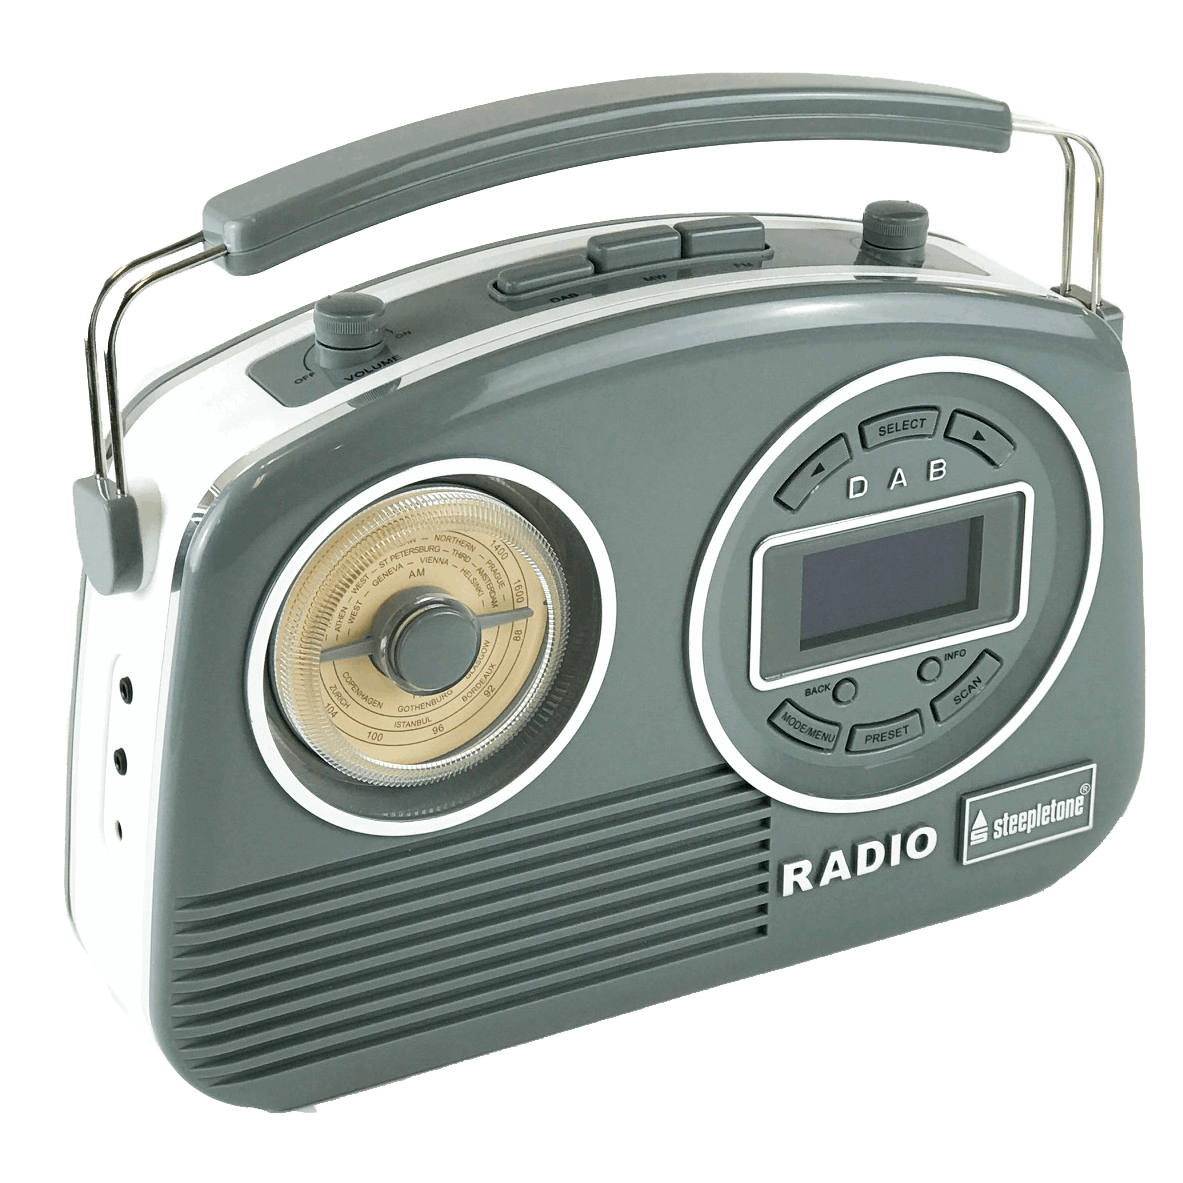 DEVON DAB Retro Style DAB Radio, with FM, large display and buttons.